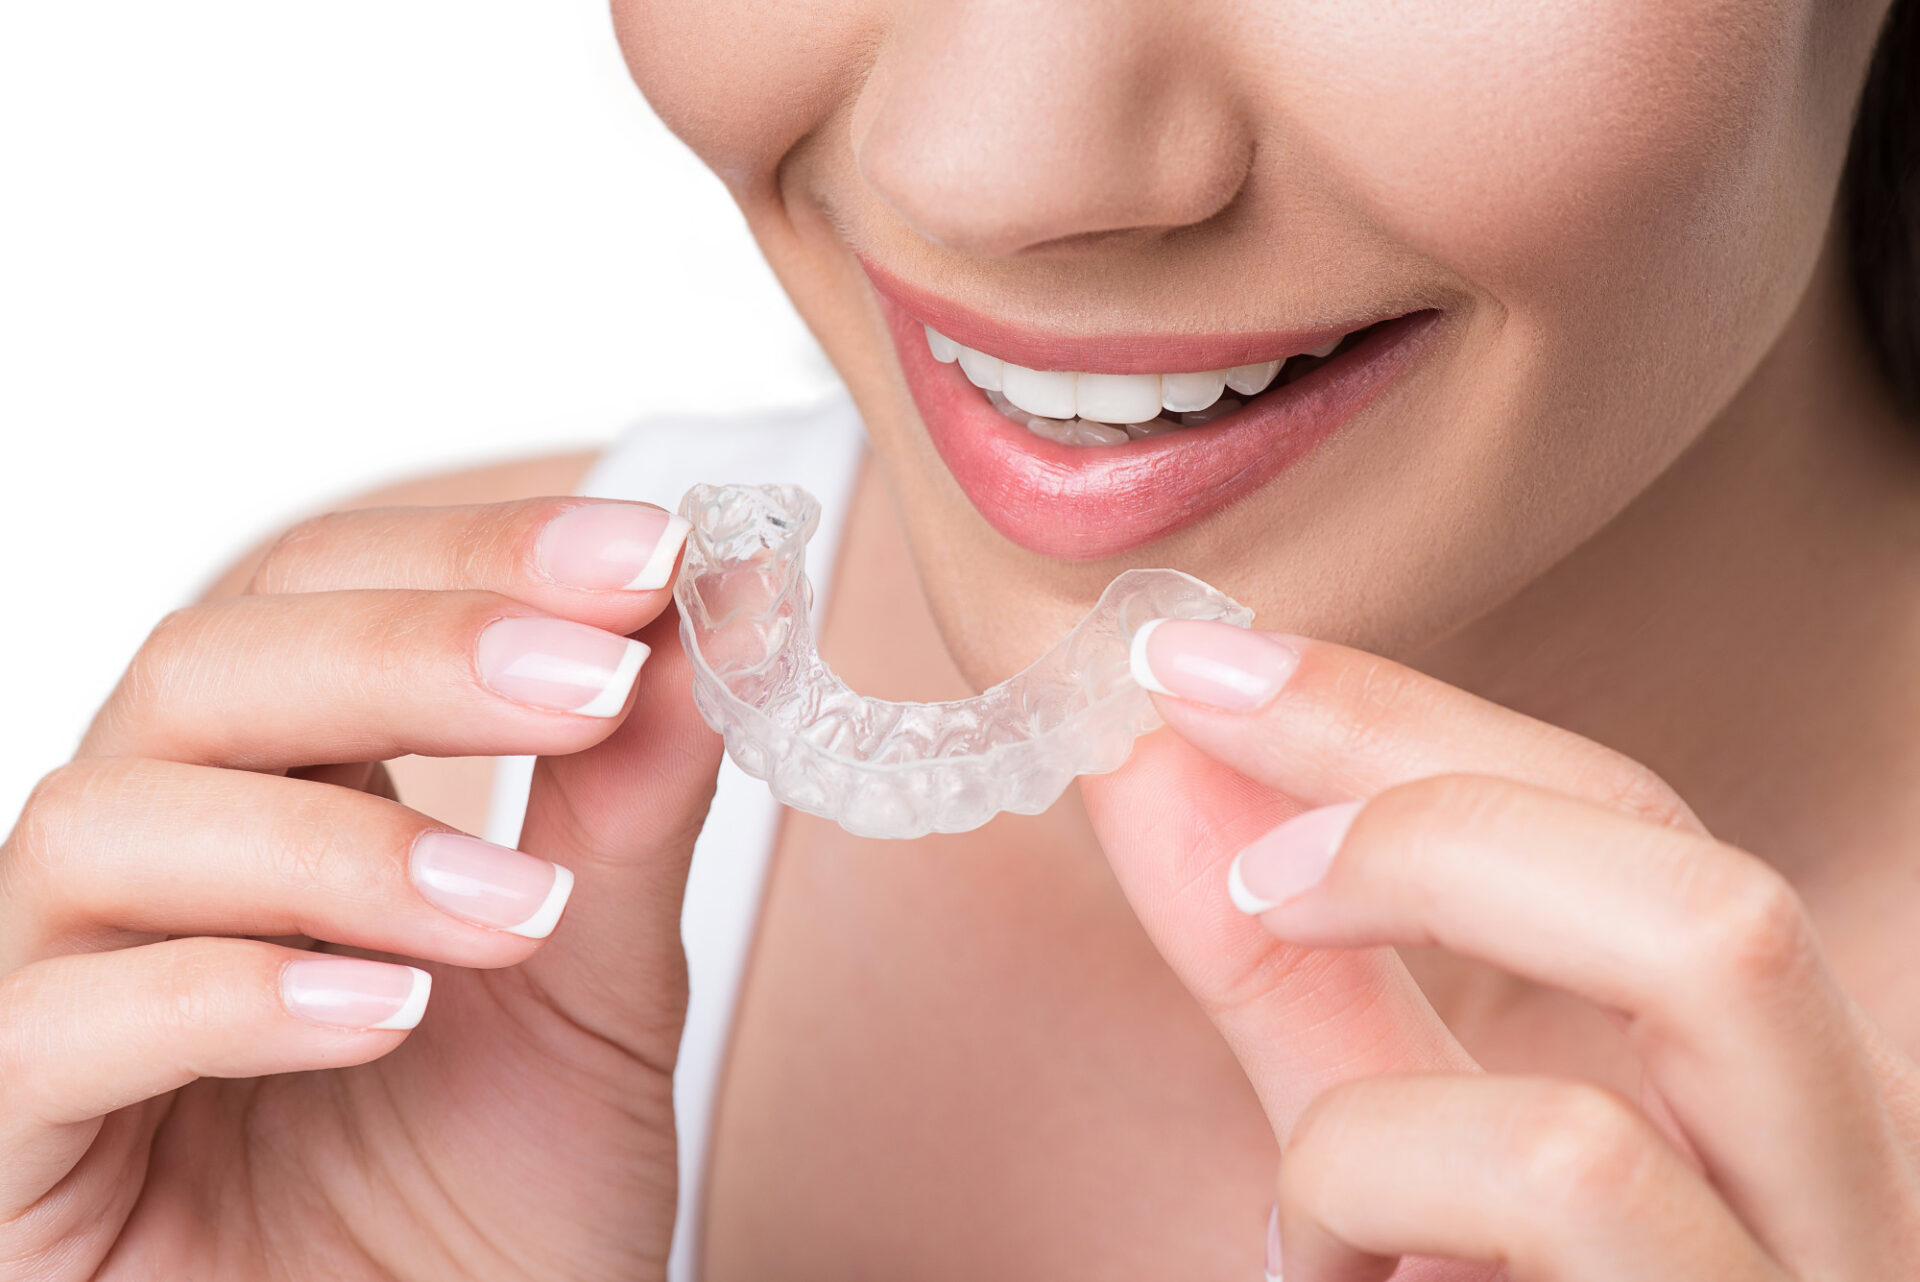 What Are Some Considerations When Wearing Invisalign Trays?